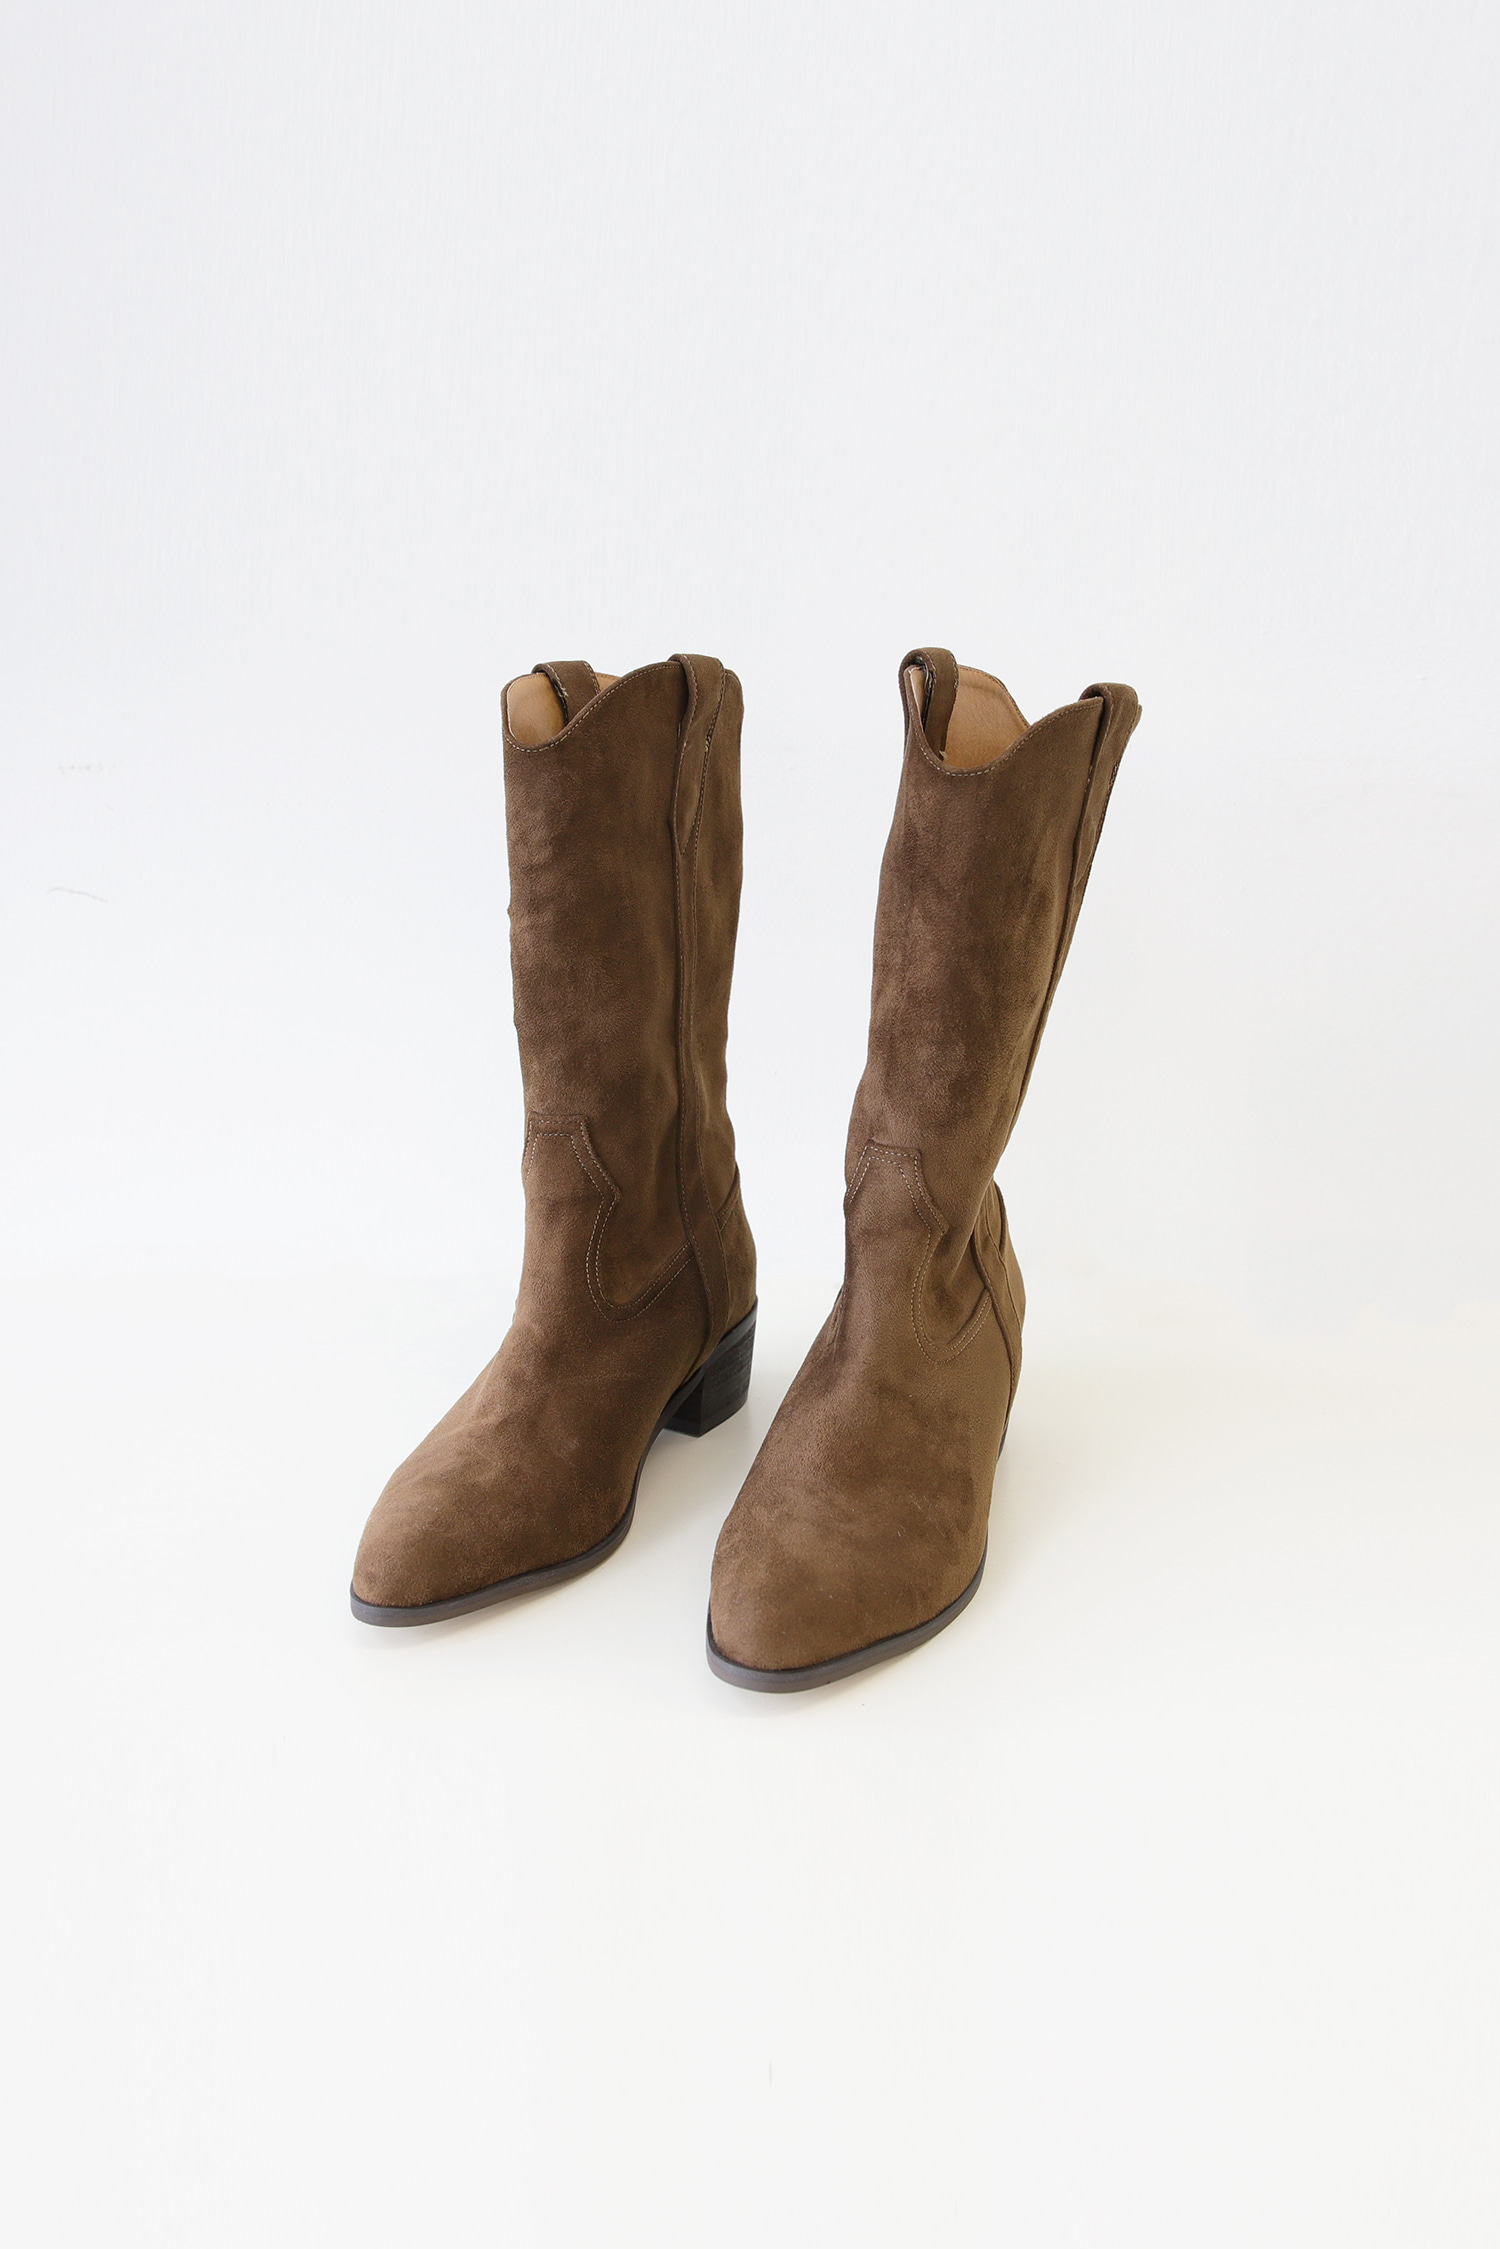 SUEDE WESTERN BOOTS(3COLORS)